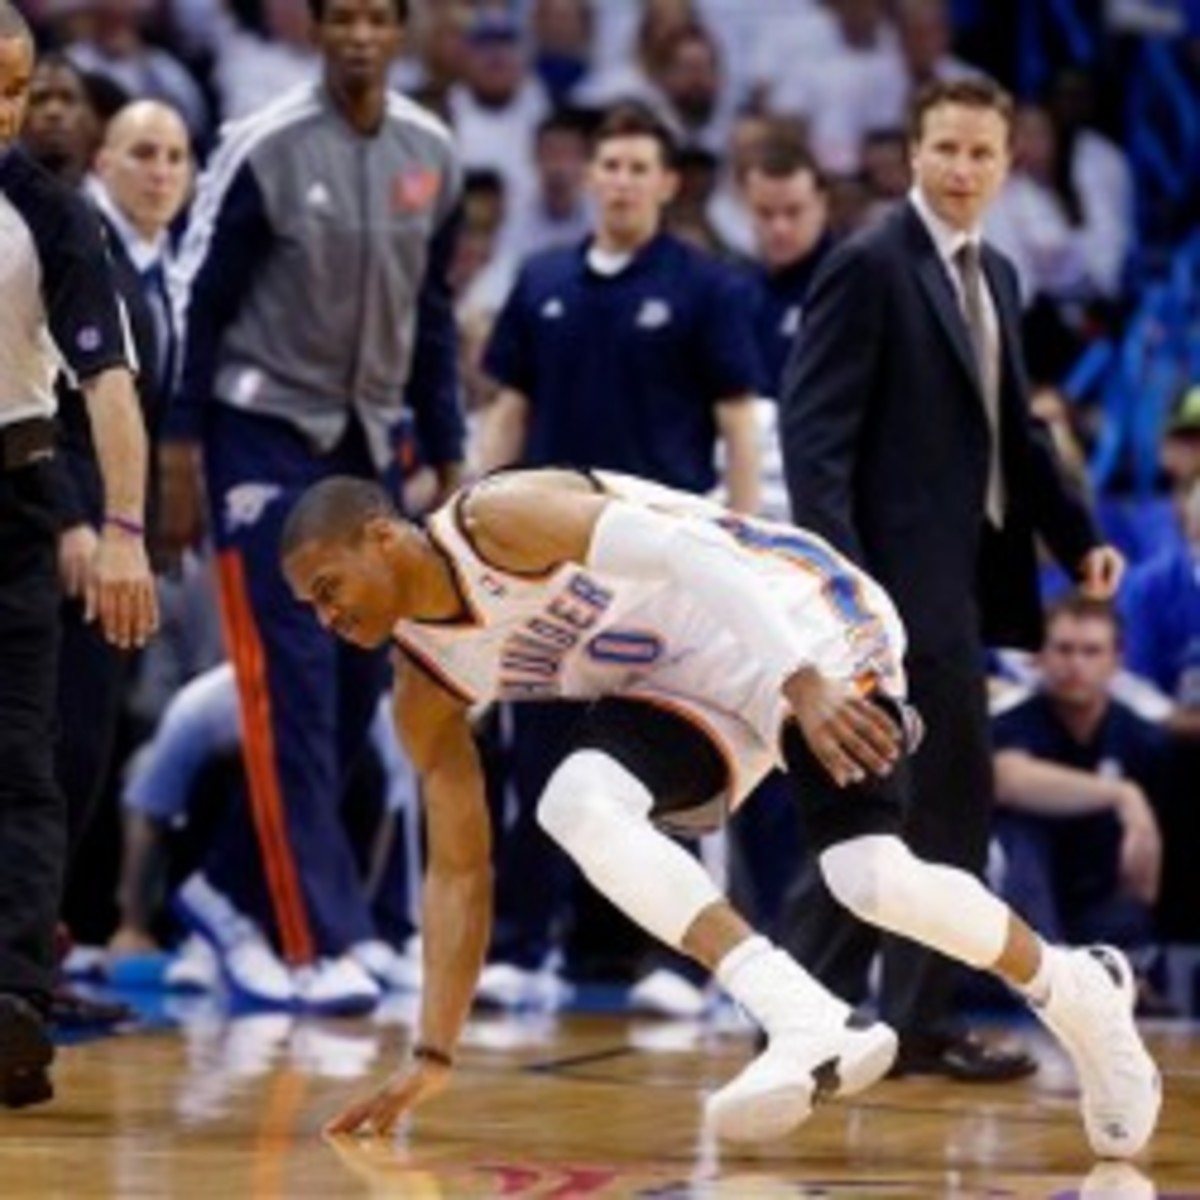 Thunder guard Russell Westbrooks attempts to get up after being injured in Game 2 against the Rockets. (AP Photo/Sue Ogrocki)